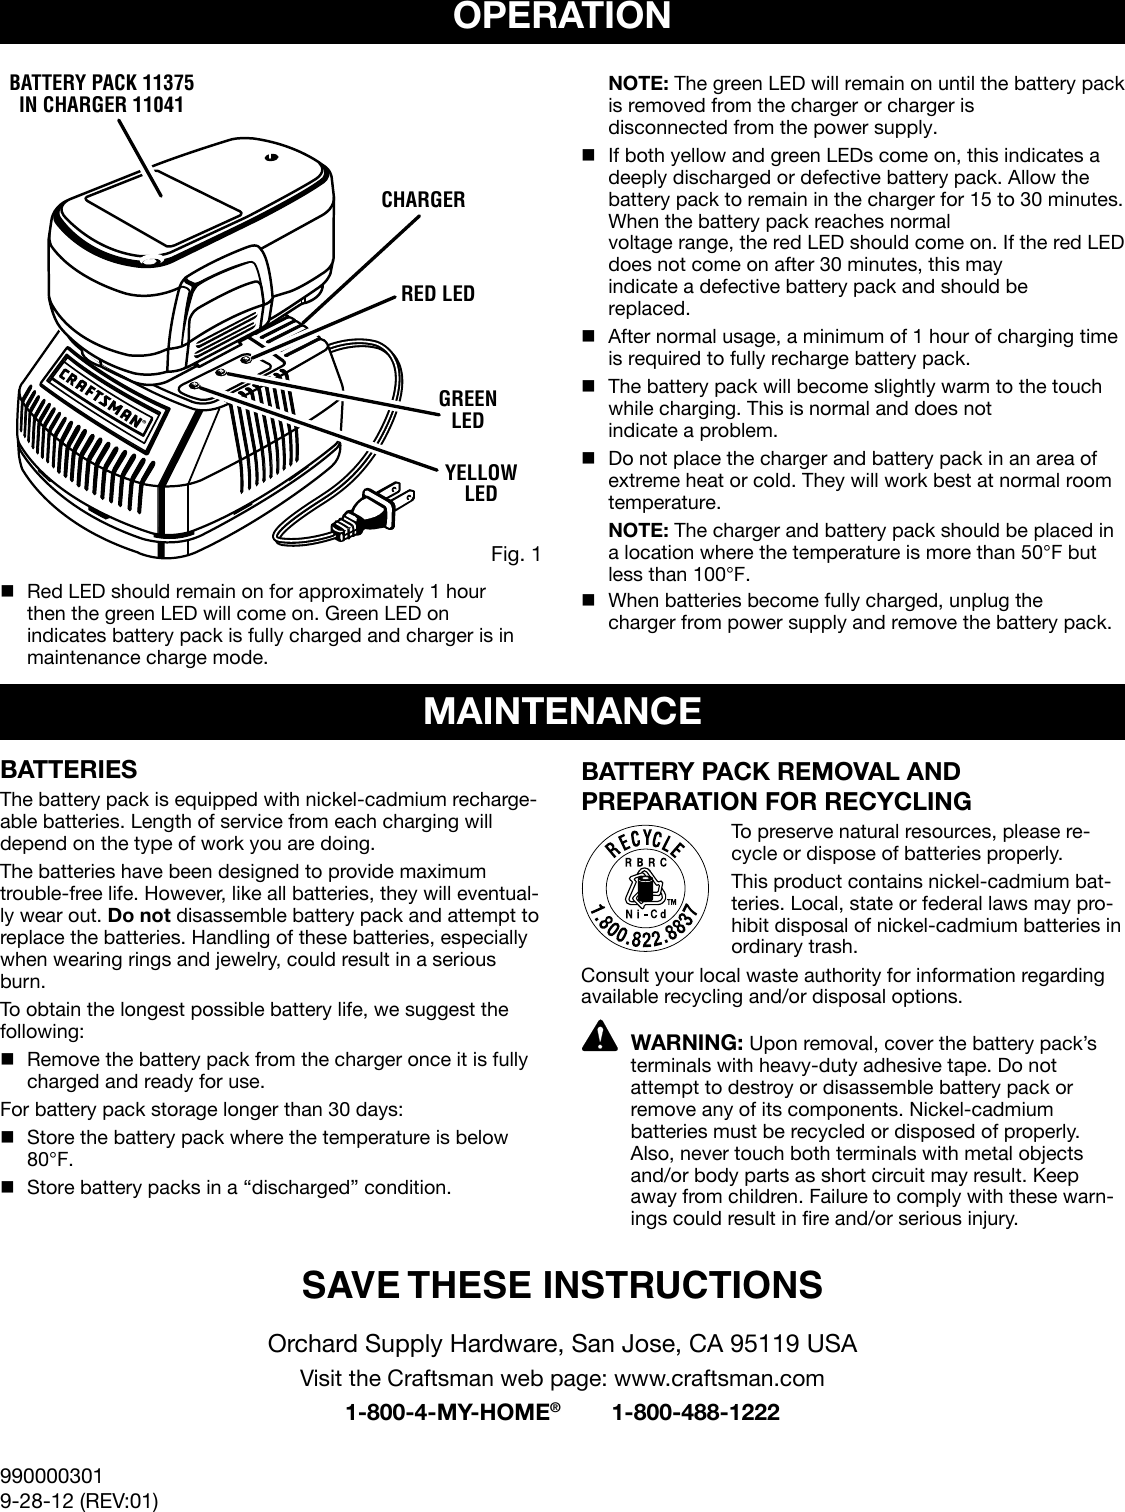 Page 2 of 4 - Craftsman Craftsman-19-2-Volt-Replacement-Battery-Pack-Owners-Manual-  Craftsman-19-2-volt-replacement-battery-pack-owners-manual